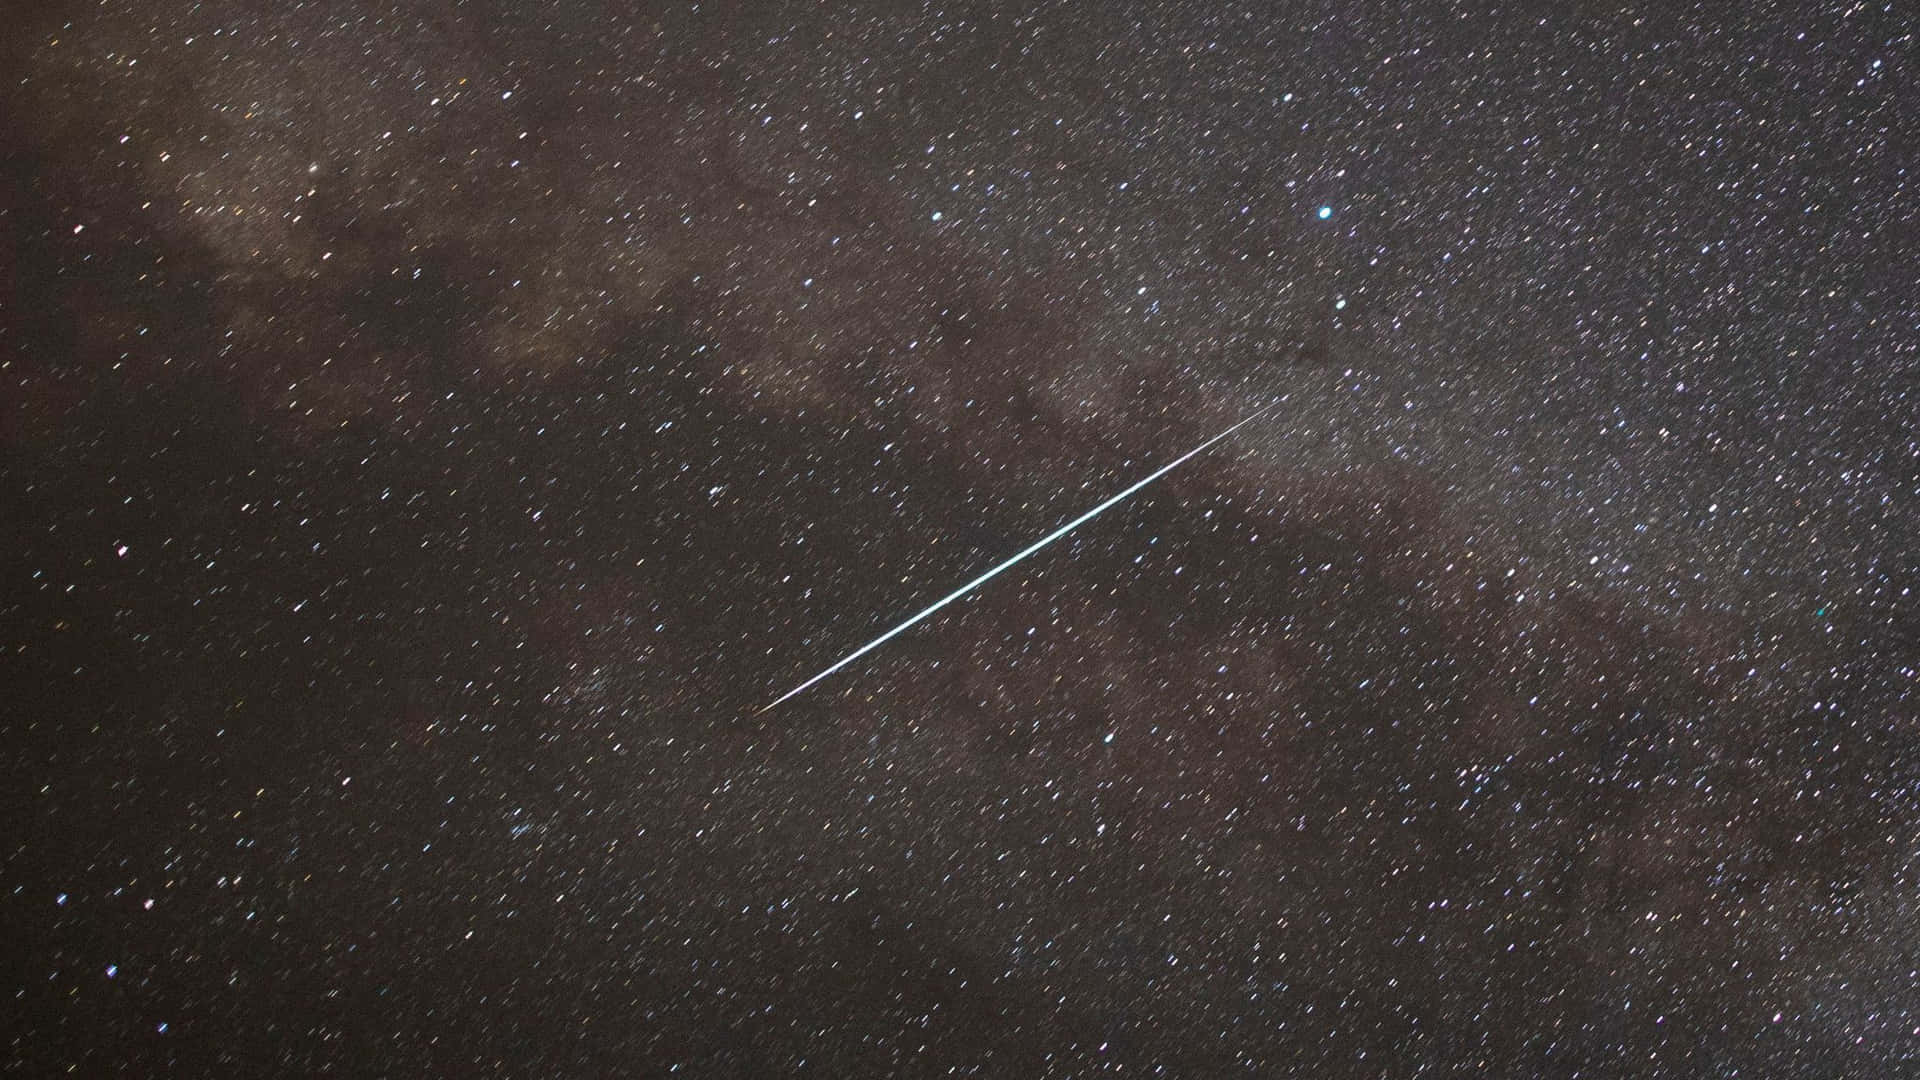 Image  Meteor Moving Through Space